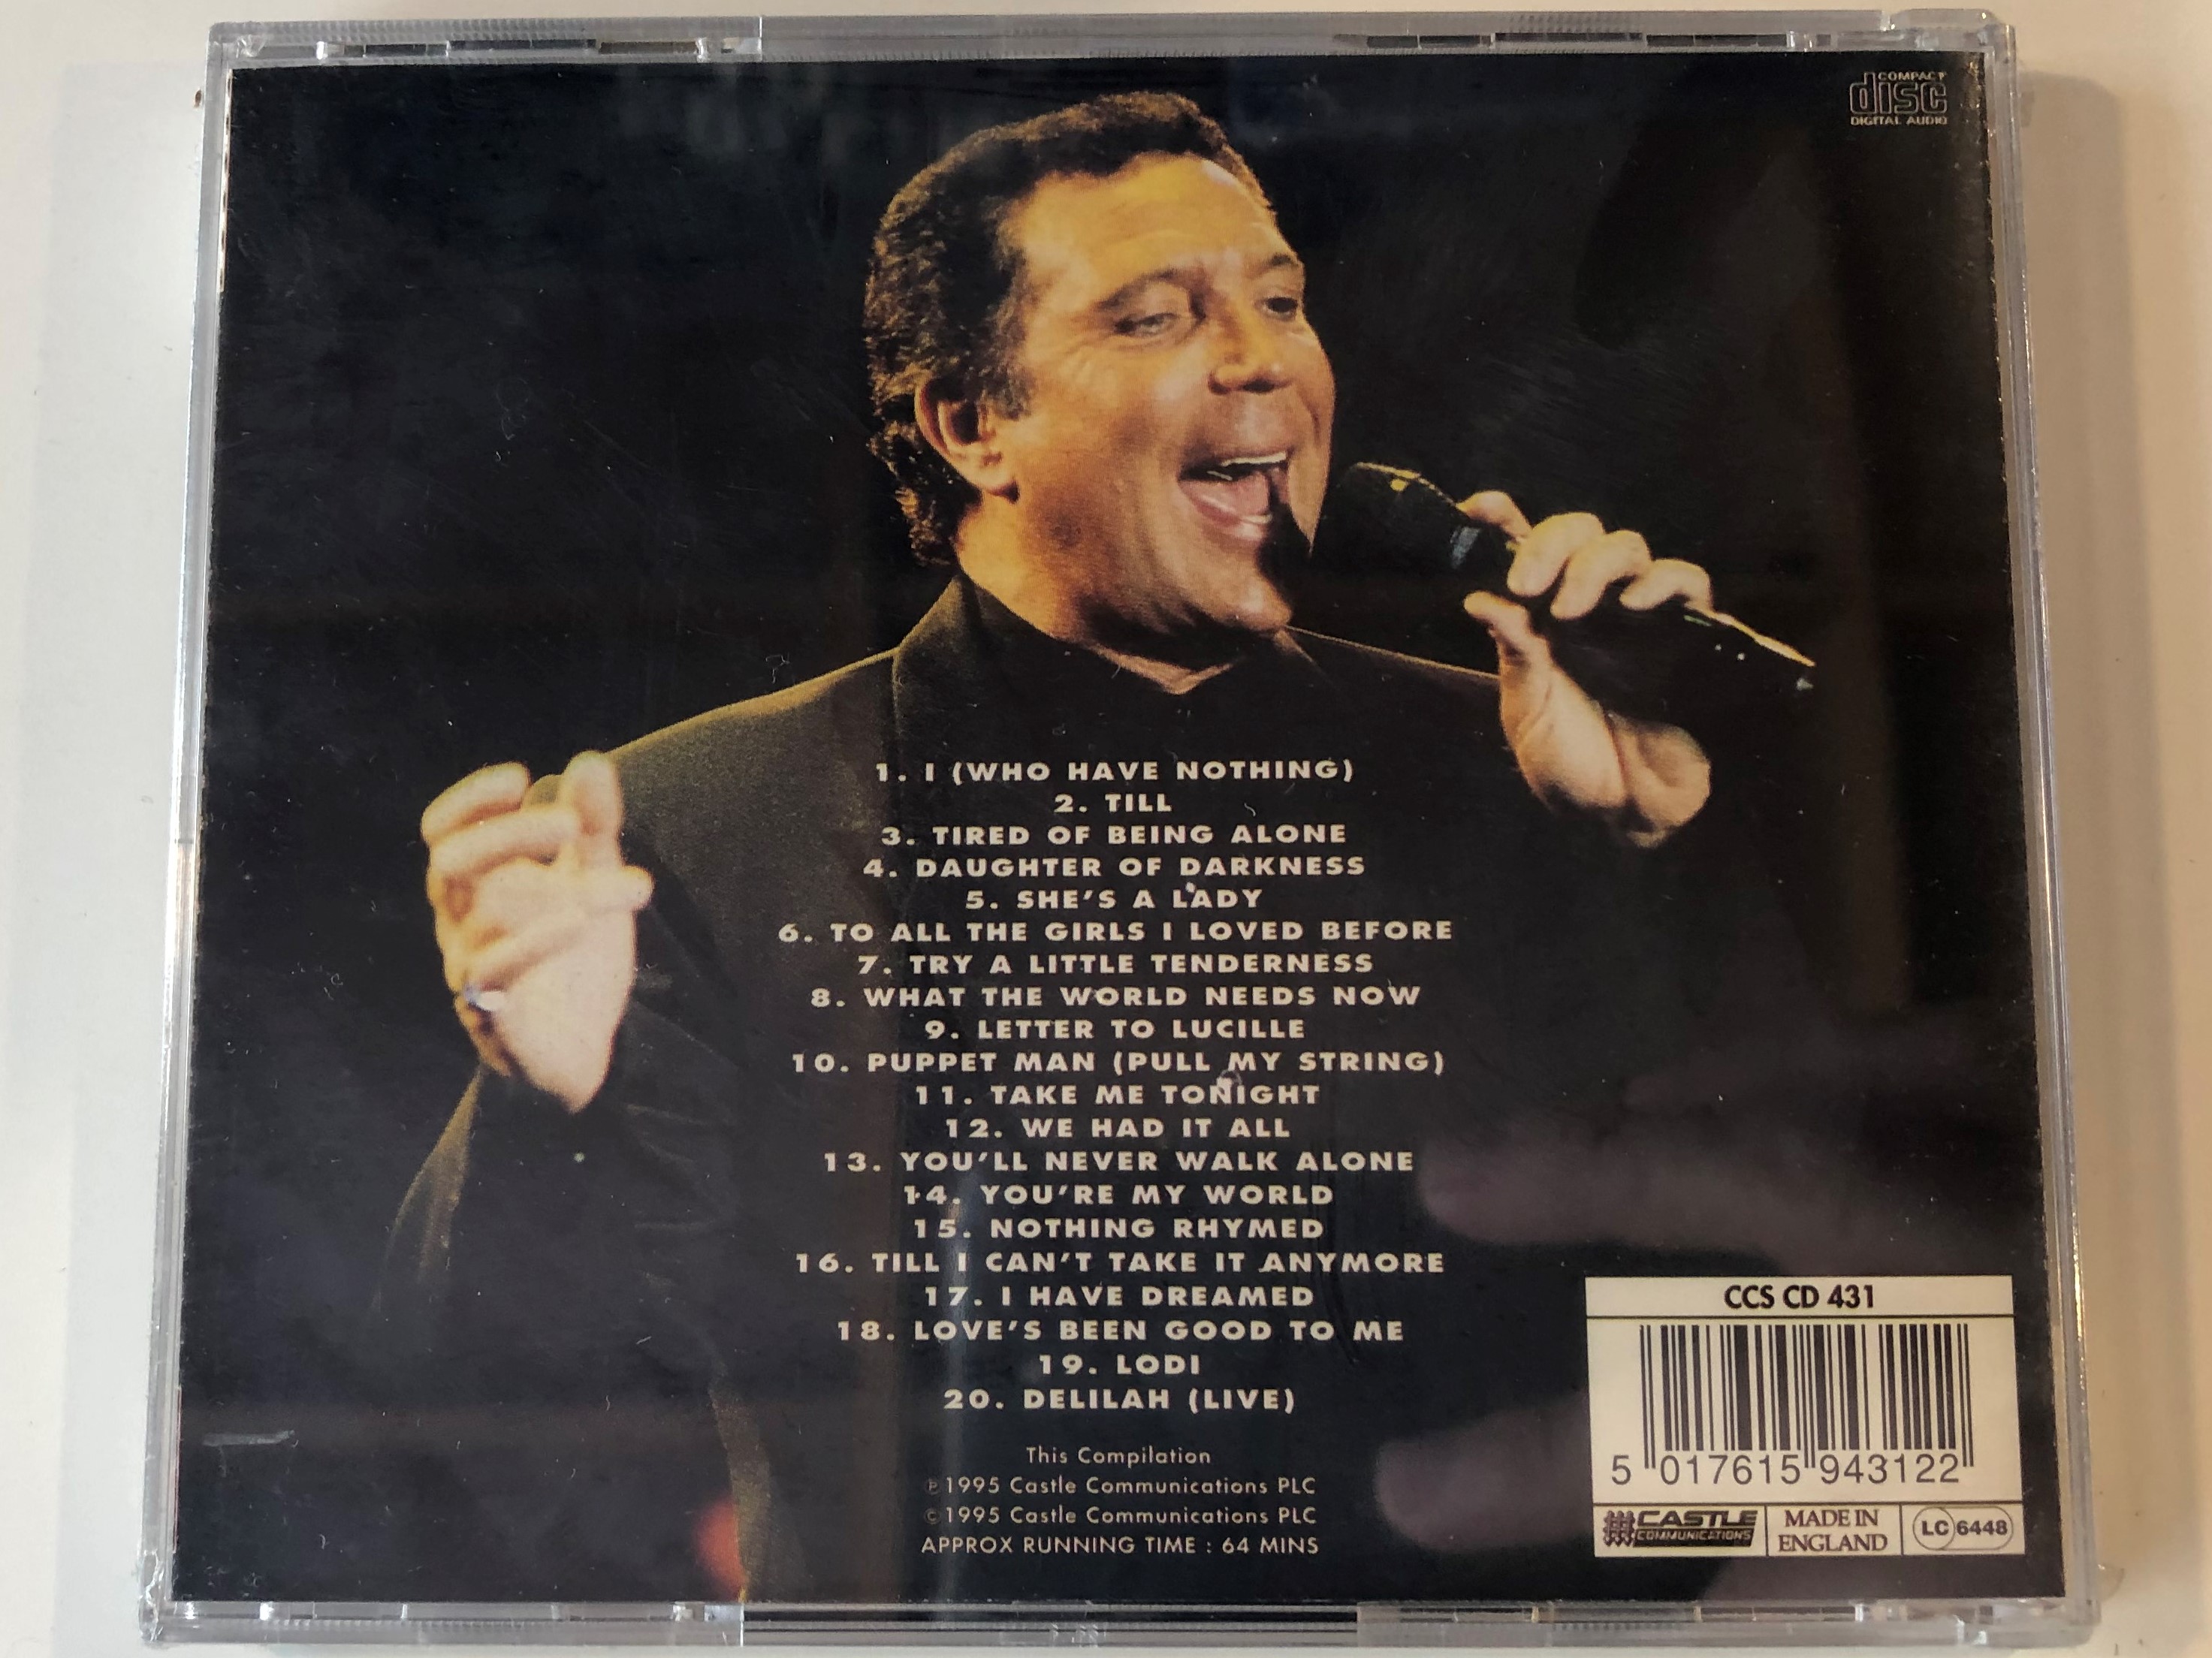 tom-jones-sings-the-greats-the-collection-castle-communications-plc-audio-cd-1995-ccs-cd-431-2-.jpg